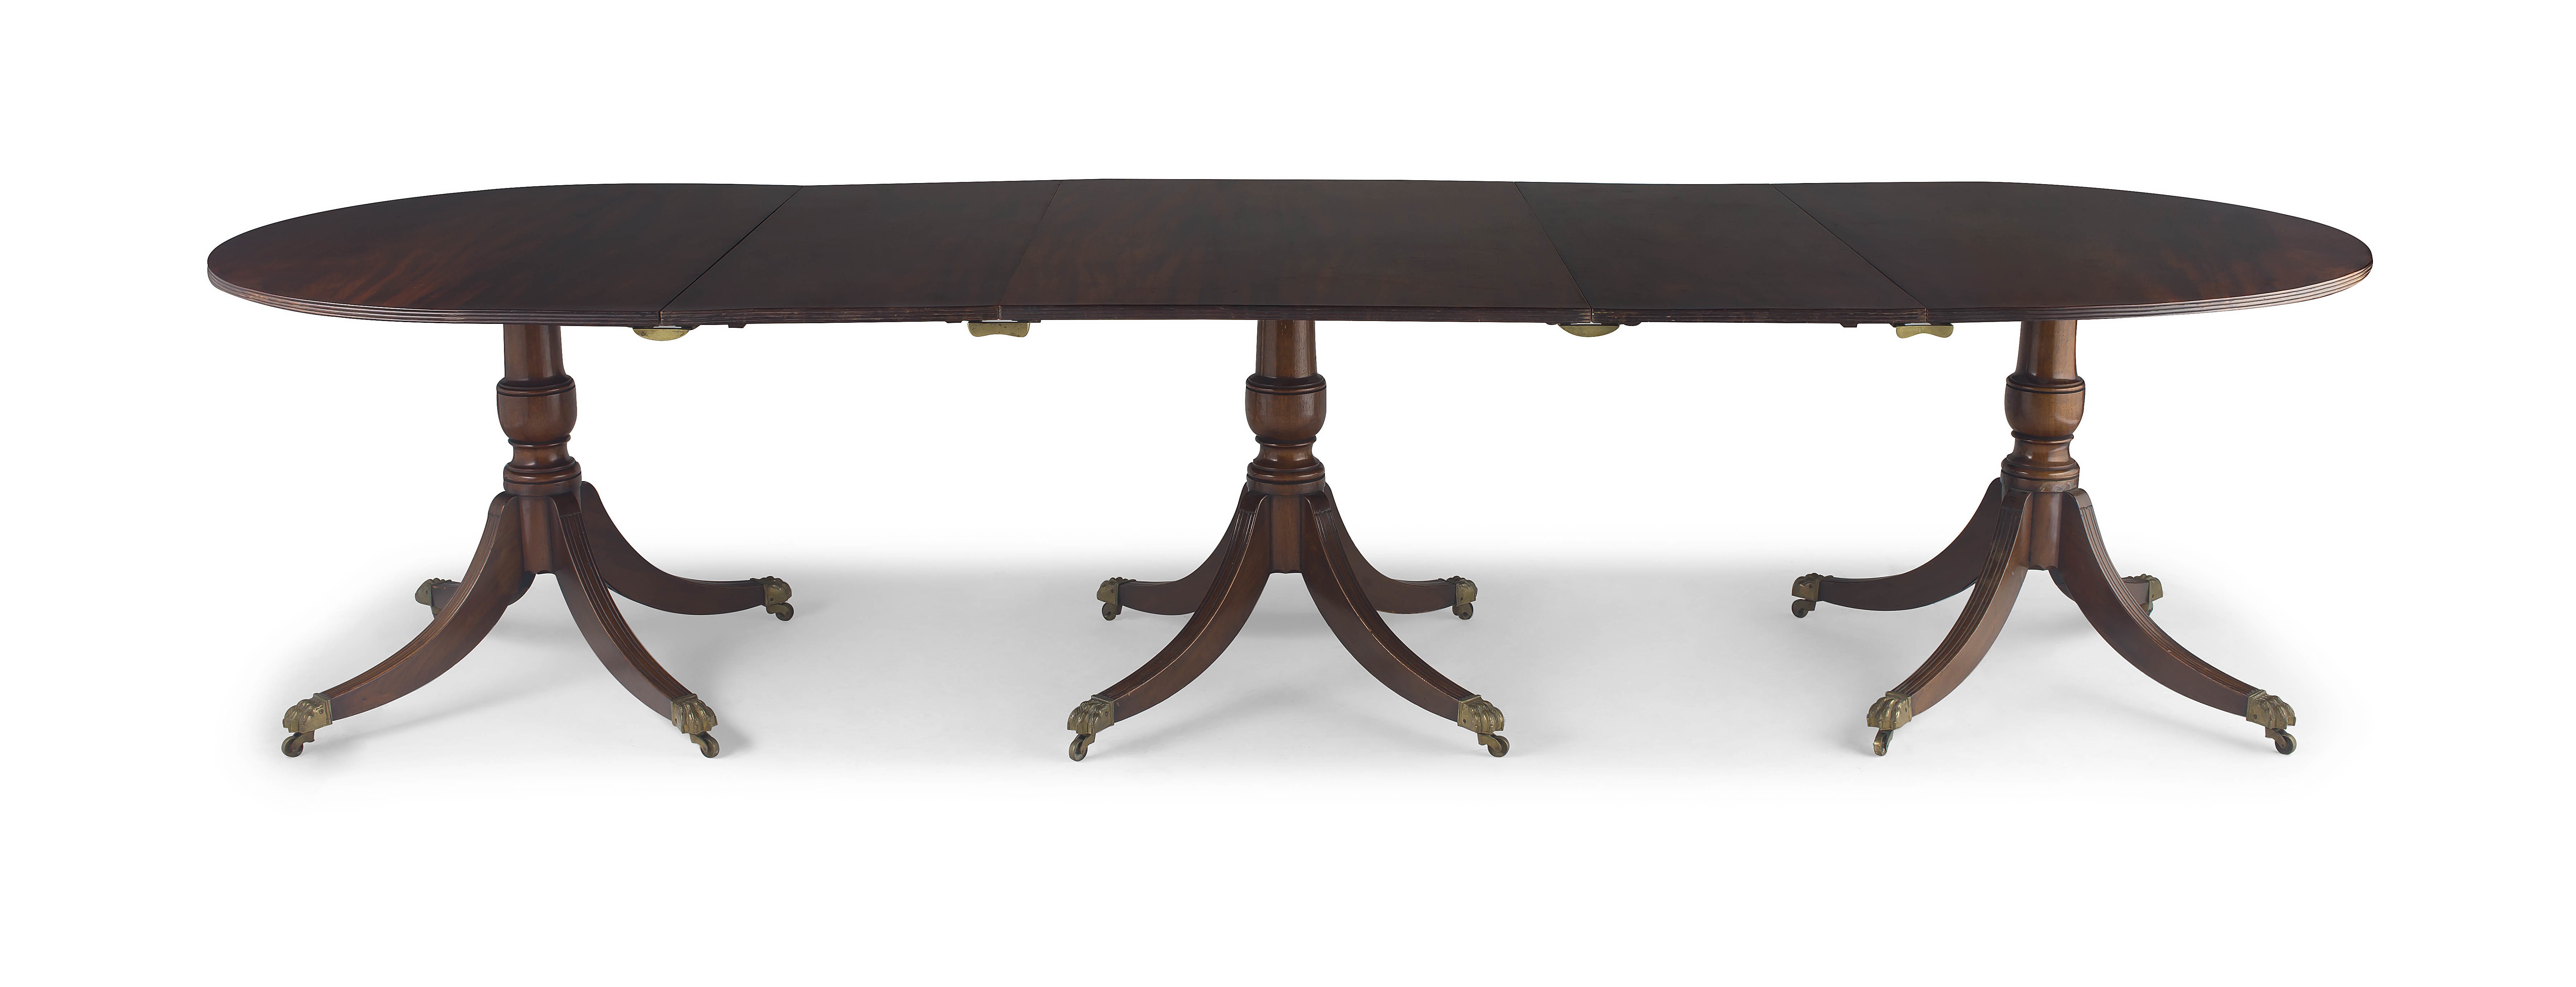 A George III style mahogany triple pedestal extending dining table